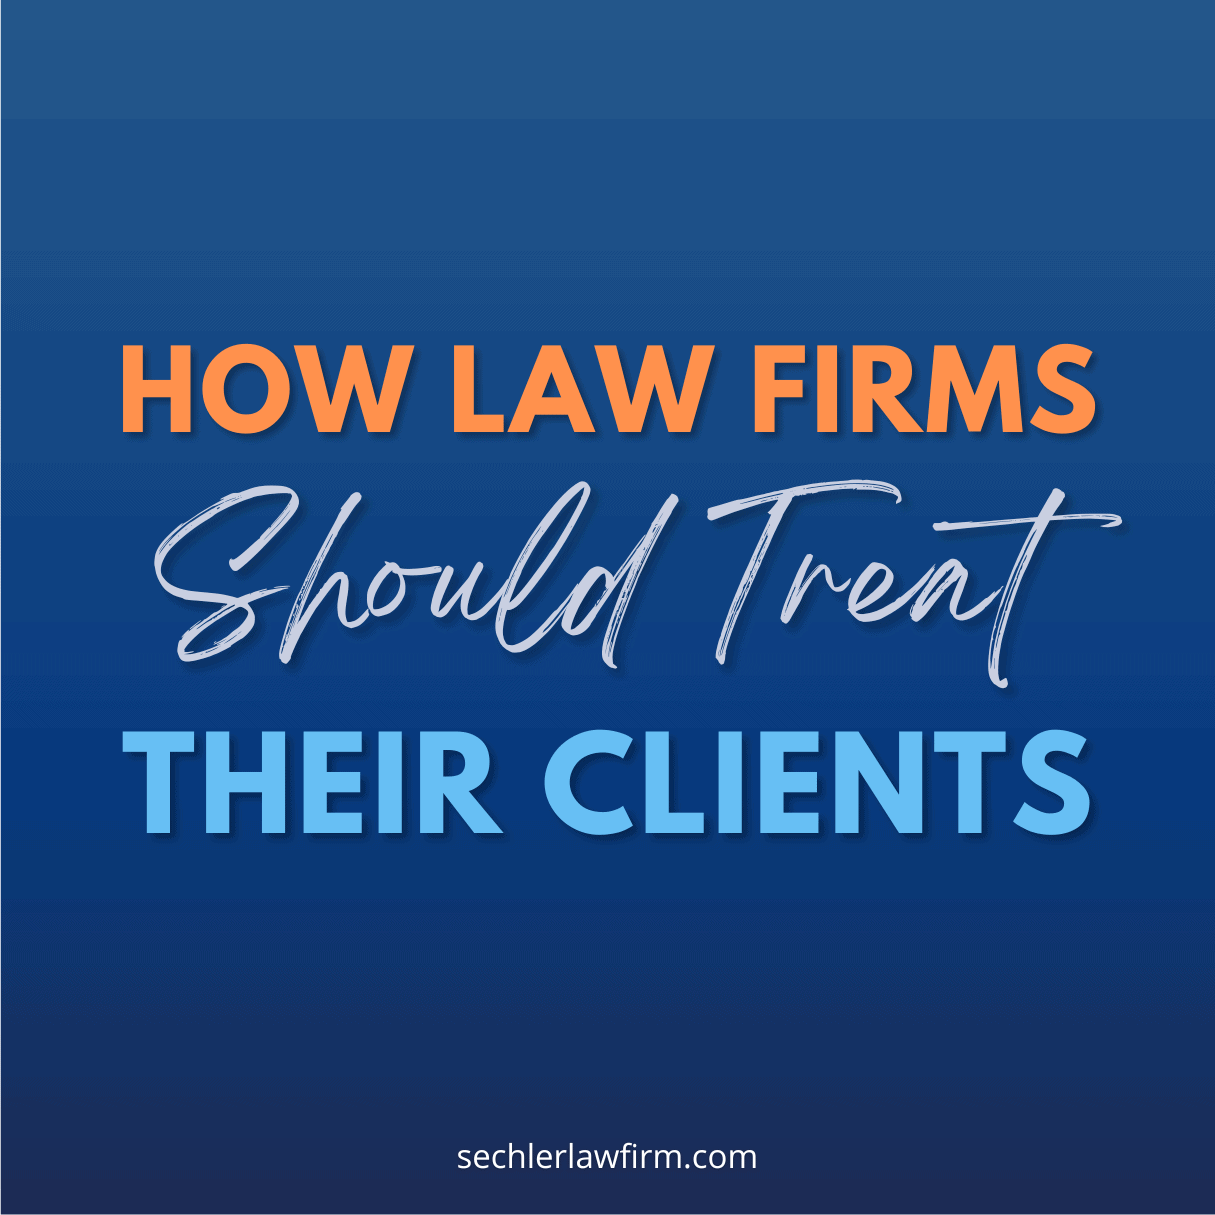 How Law Firms Should Treat Their Clients